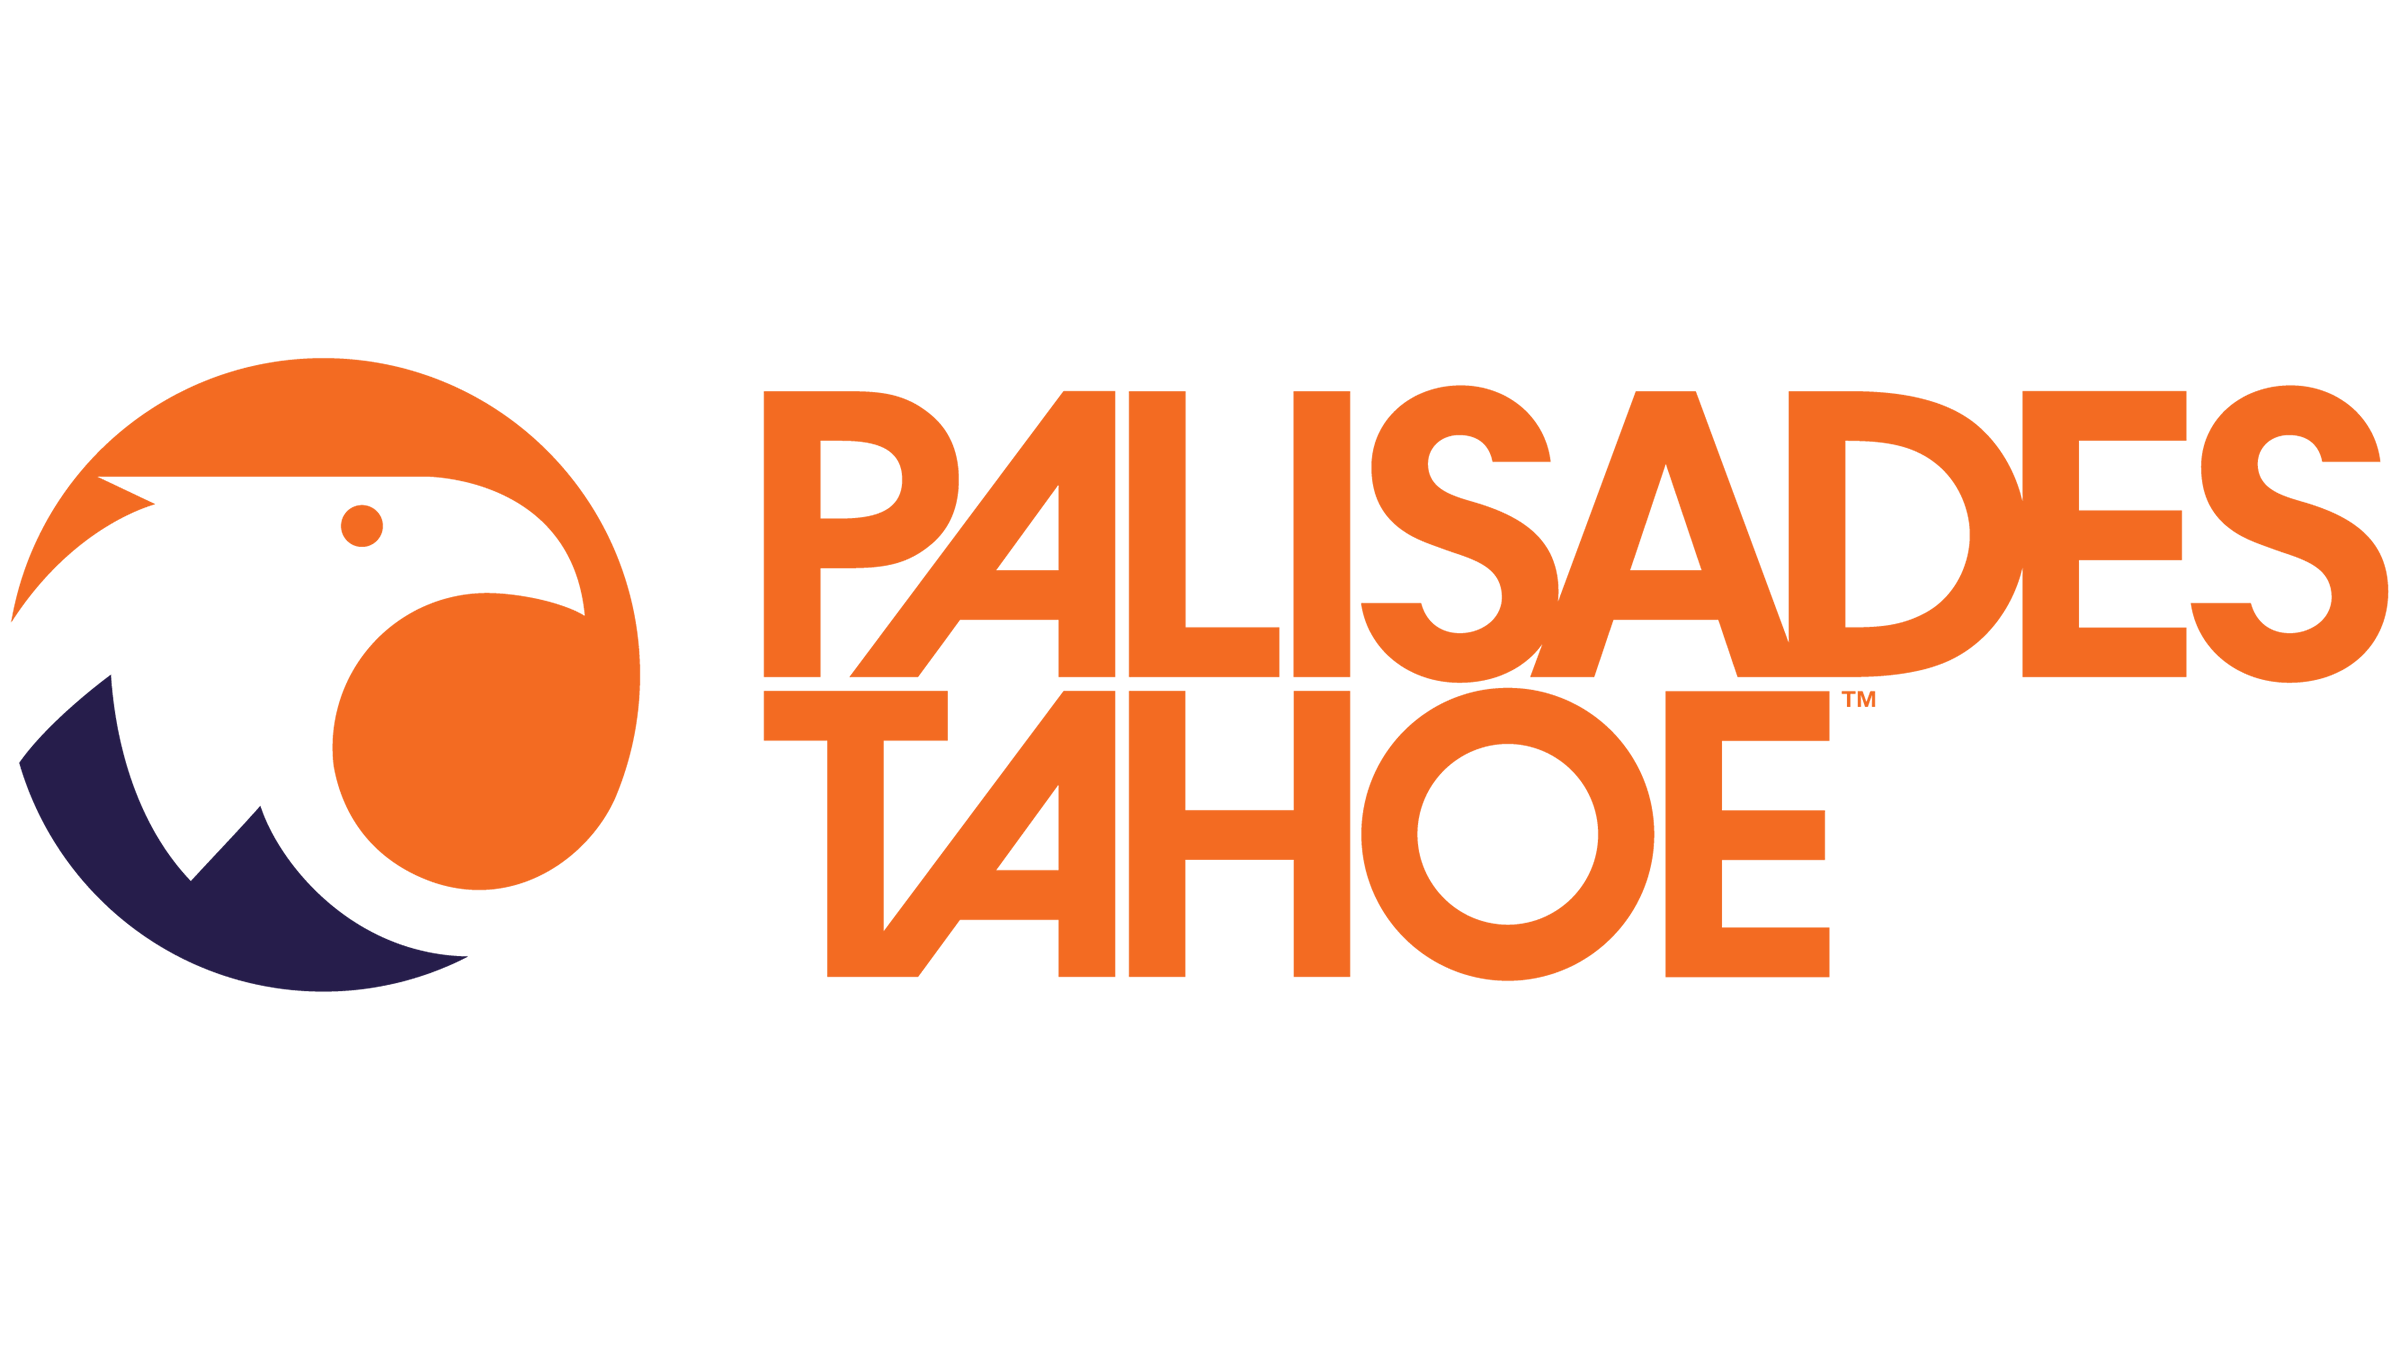 New logo of Palisades Tahoe featuring an Eagle